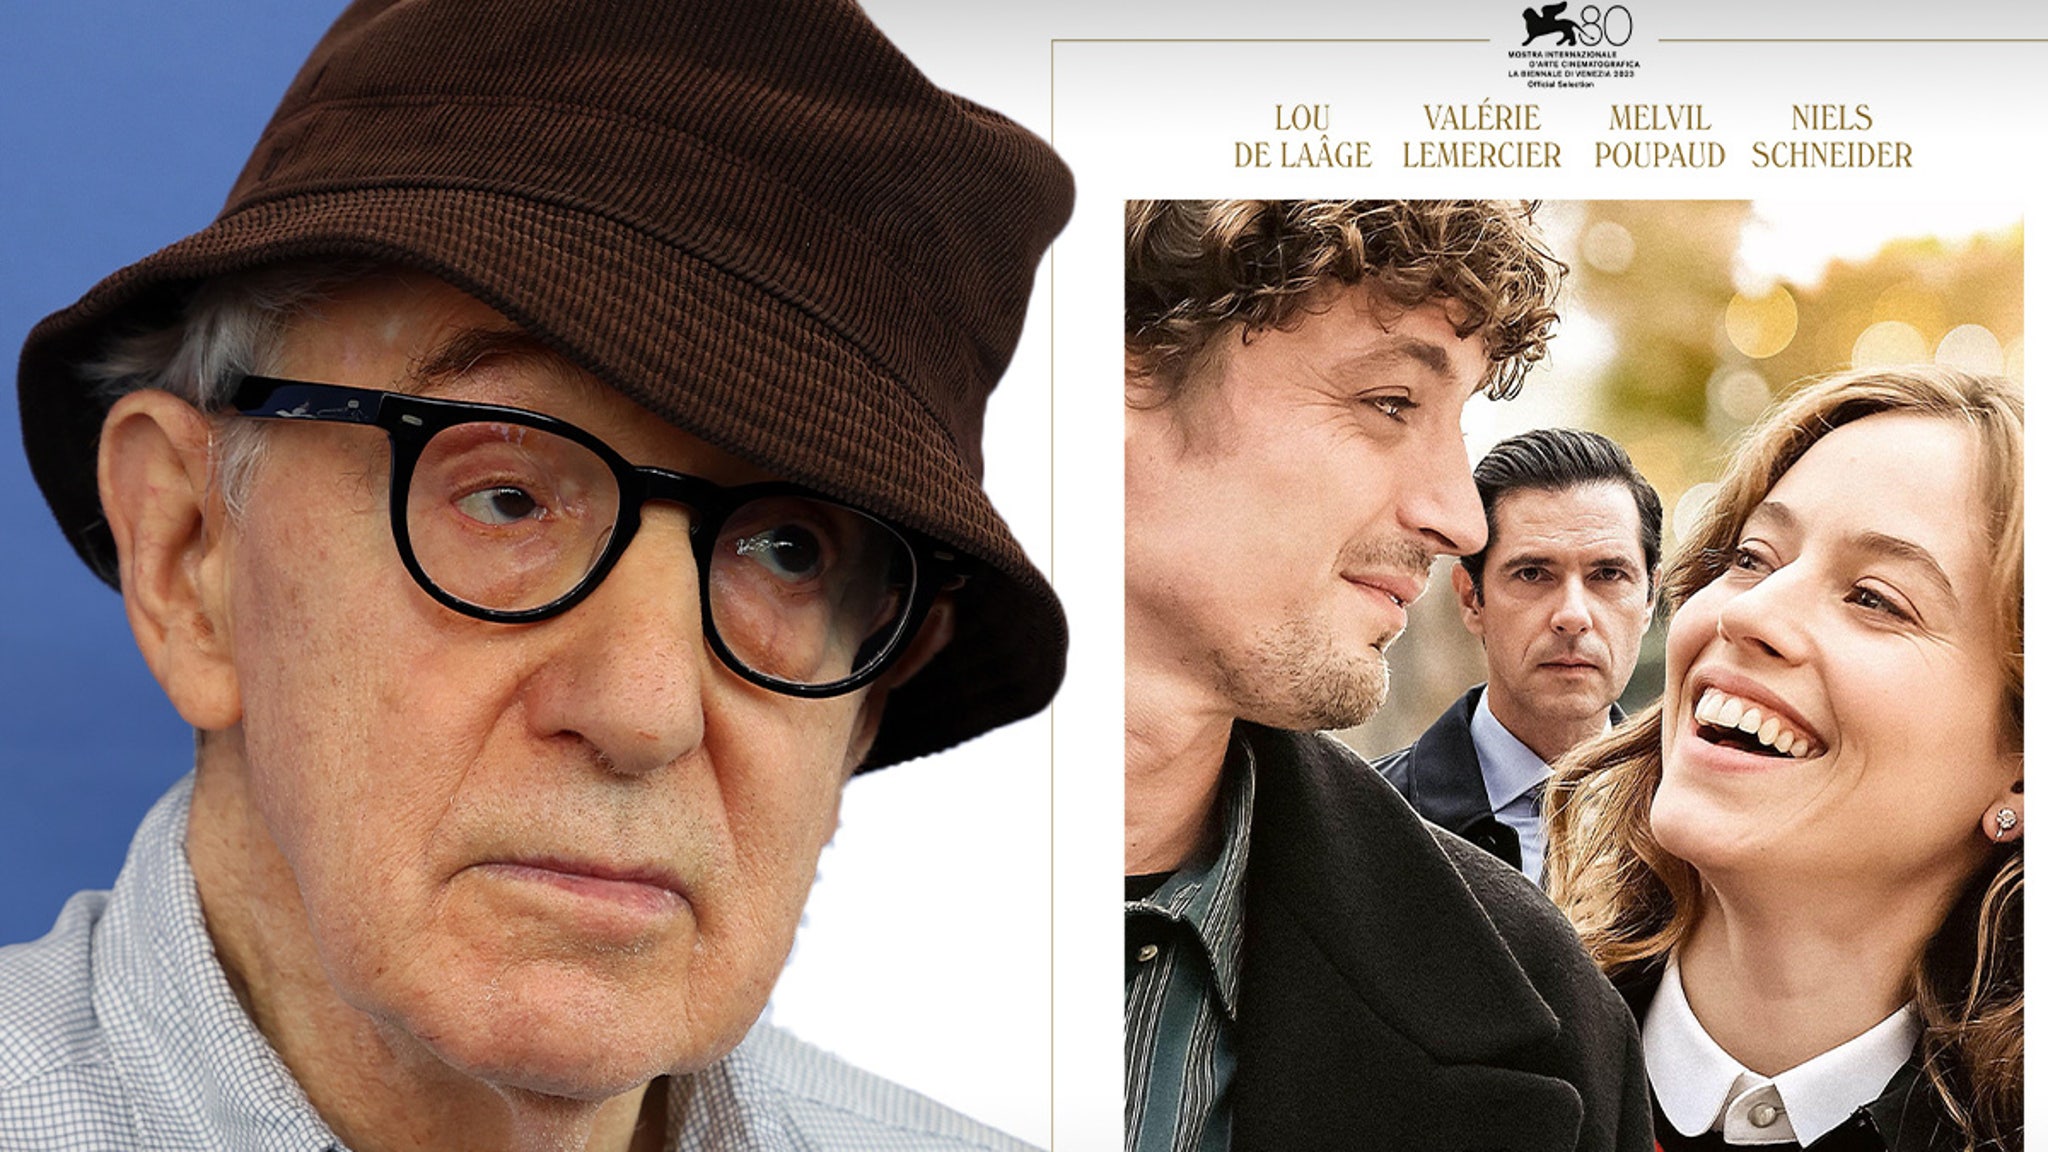 Woody Allen Says ‘Romance’ of Moviemaking Gone, ‘Coup de Chance’ Could Be Last